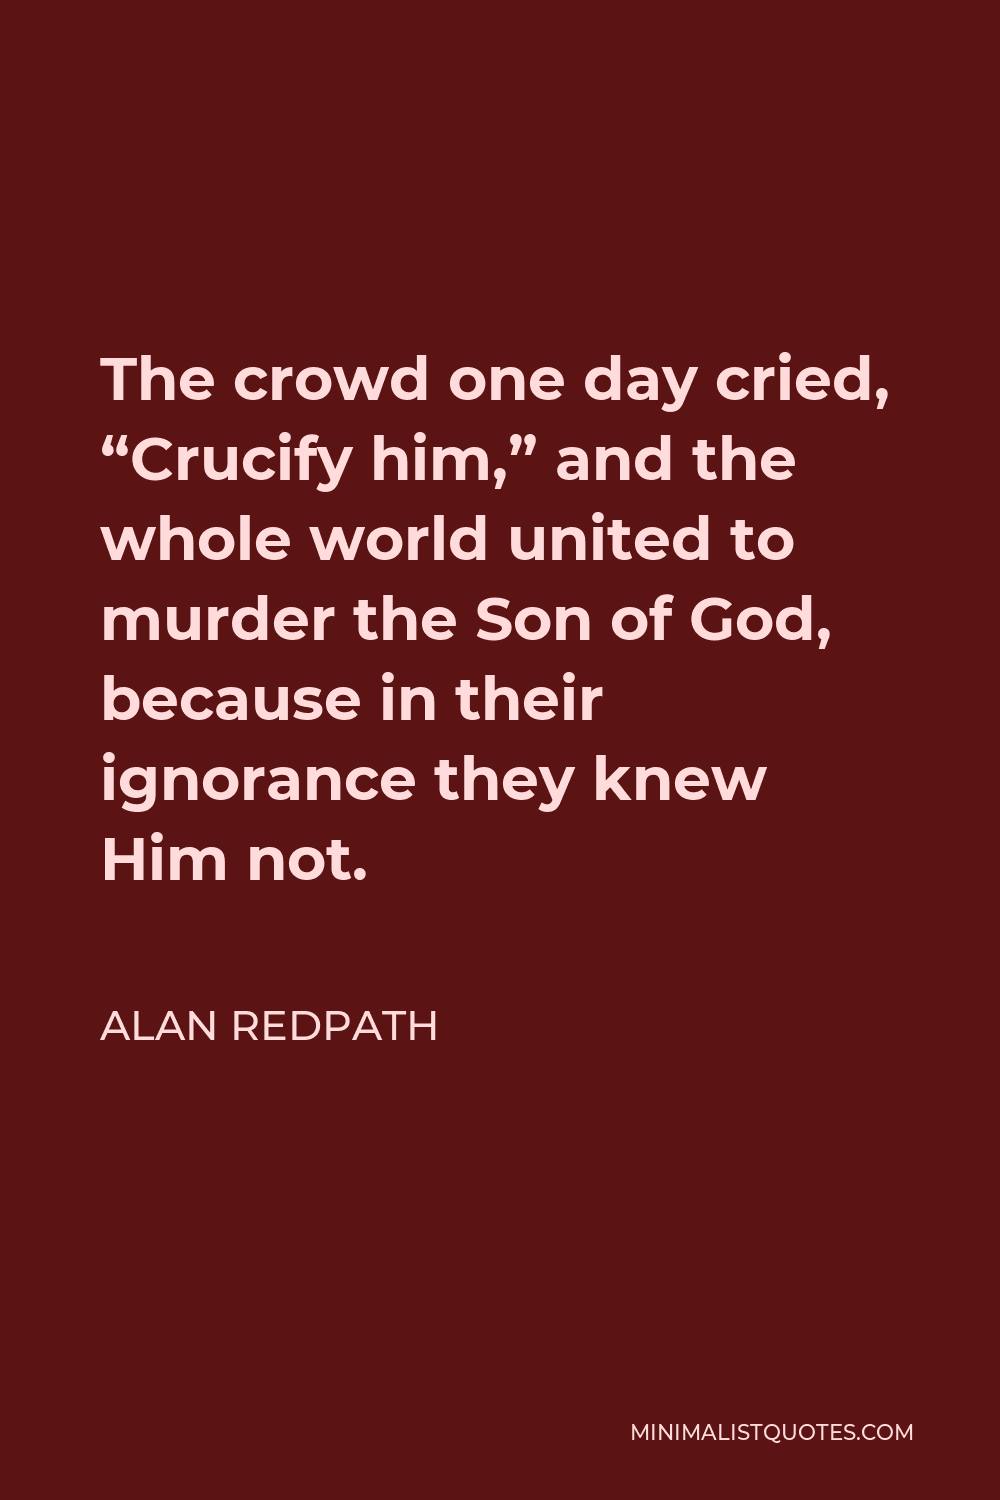 Alan Redpath Quote - The crowd one day cried, “Crucify him,” and the whole world united to murder the Son of God, because in their ignorance they knew Him not.